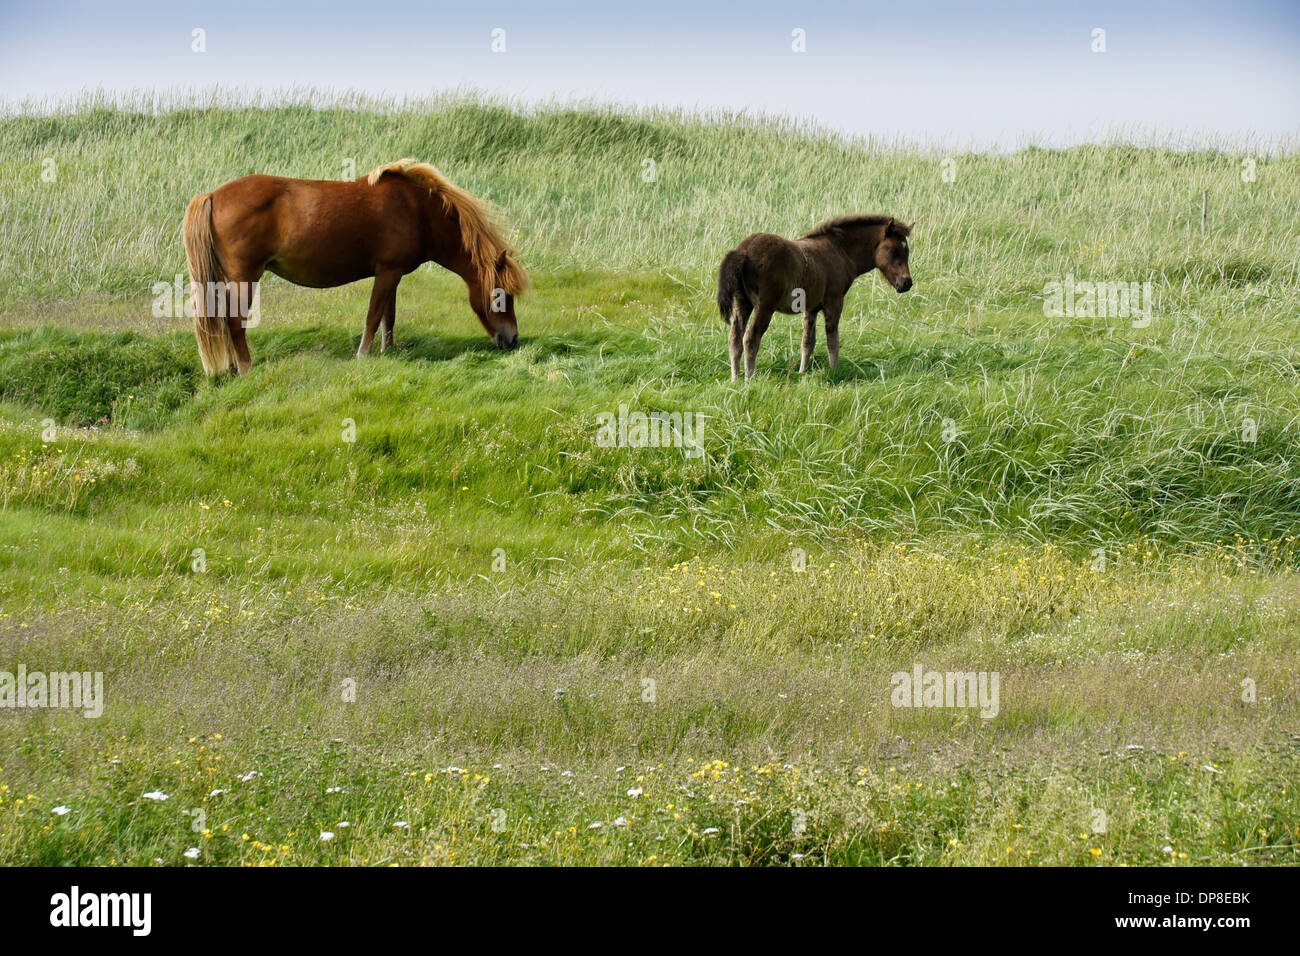 Icelandic horse (mare and foal) grazing in field, Iceland Stock Photo